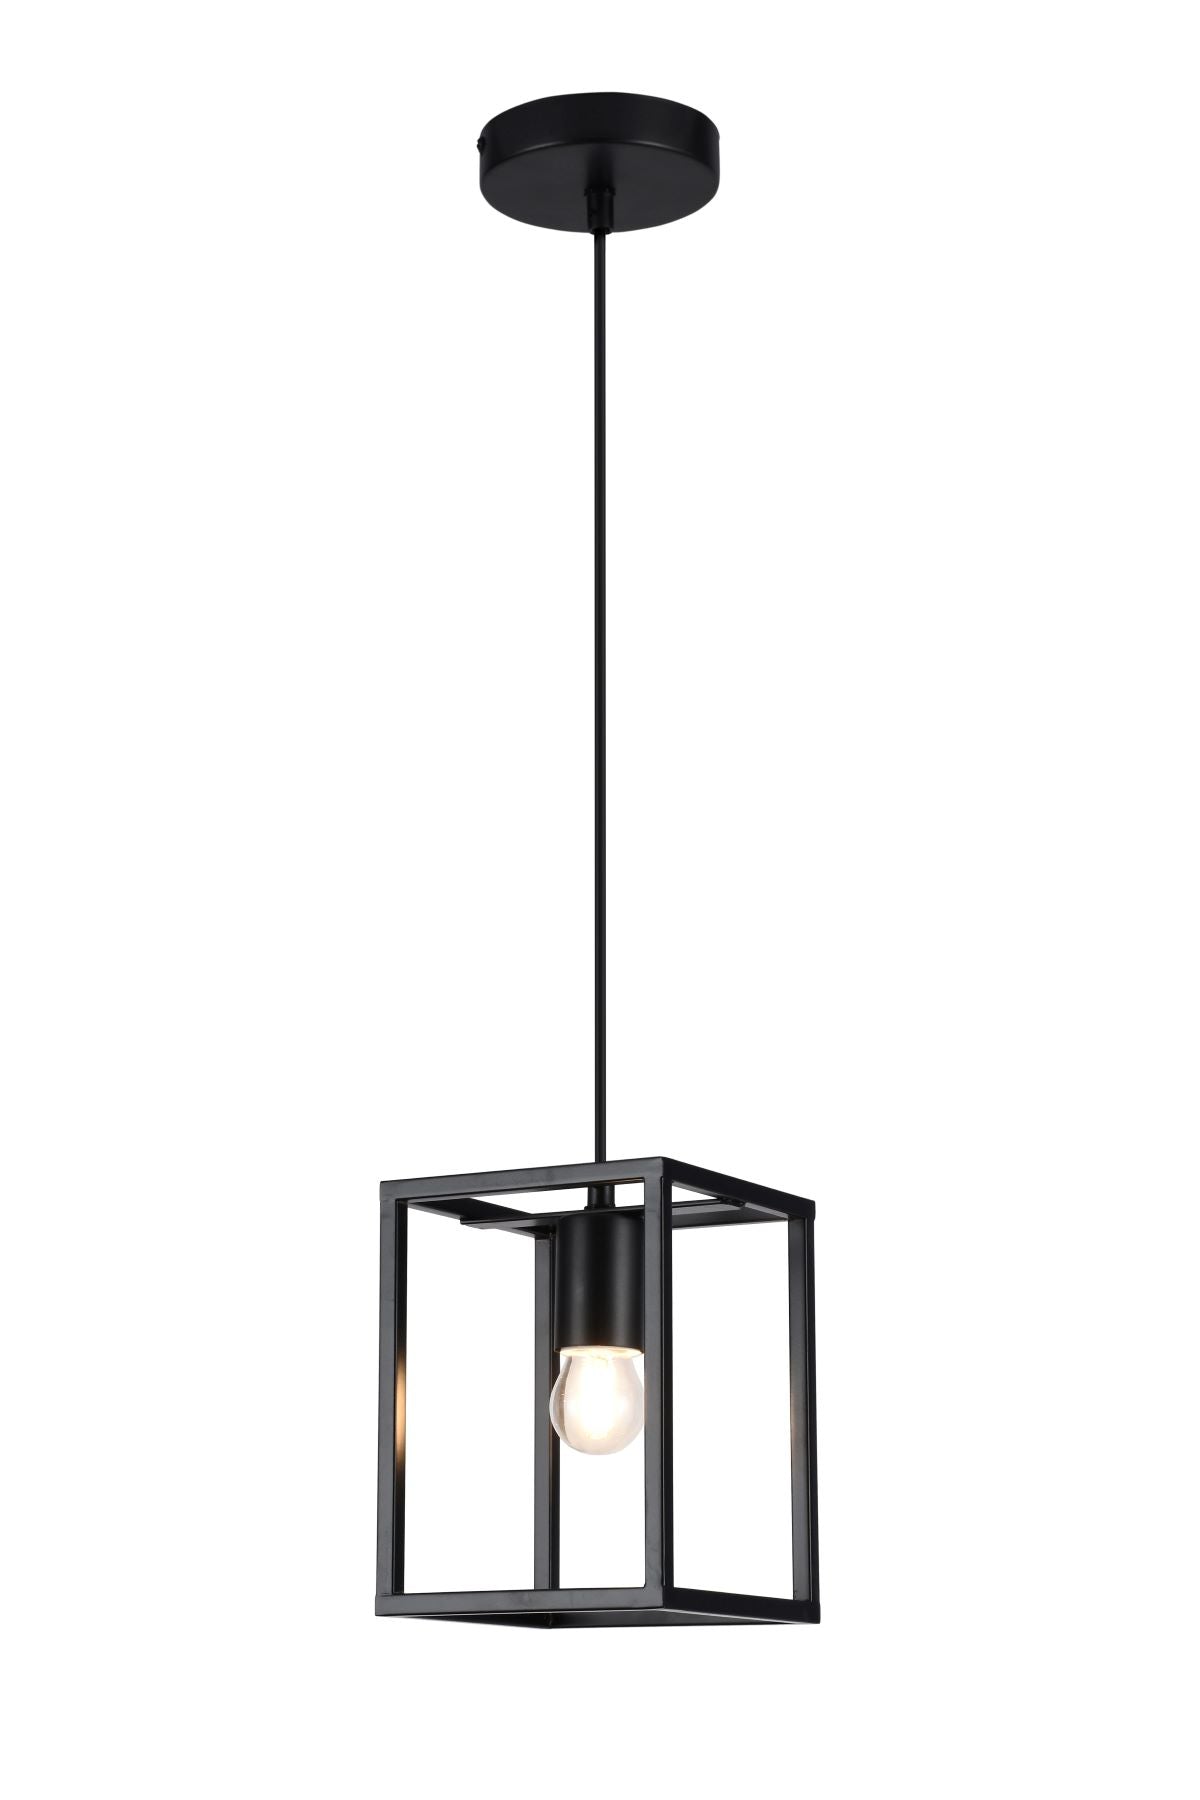 Our Molly pendant light is a stylish addition suitable for every room, its metal black square cage shape creates a beautiful feature on any ceiling. The lamp looks great with a filament light bulb, especially in industrial and modern interiors.